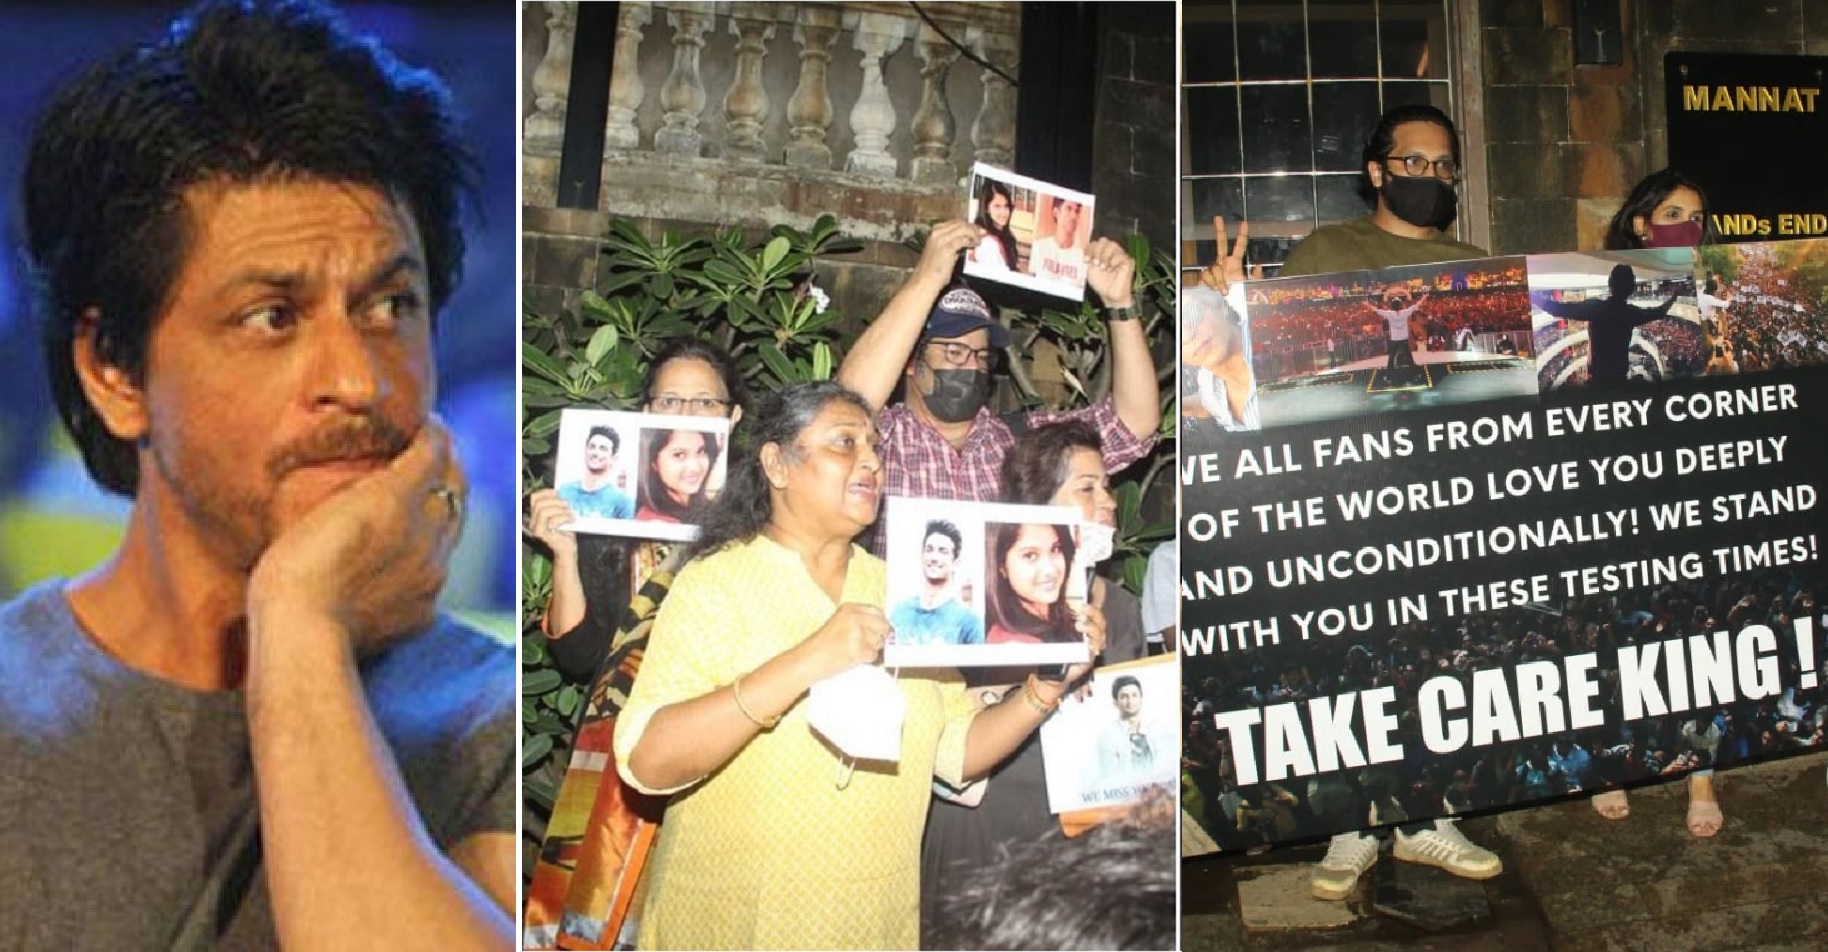 After SRK Fans Crowd Outside Mannat For Aryan, Sushant Singh Rajput Fans Show-Up To Seek ‘Justice’ For The Star